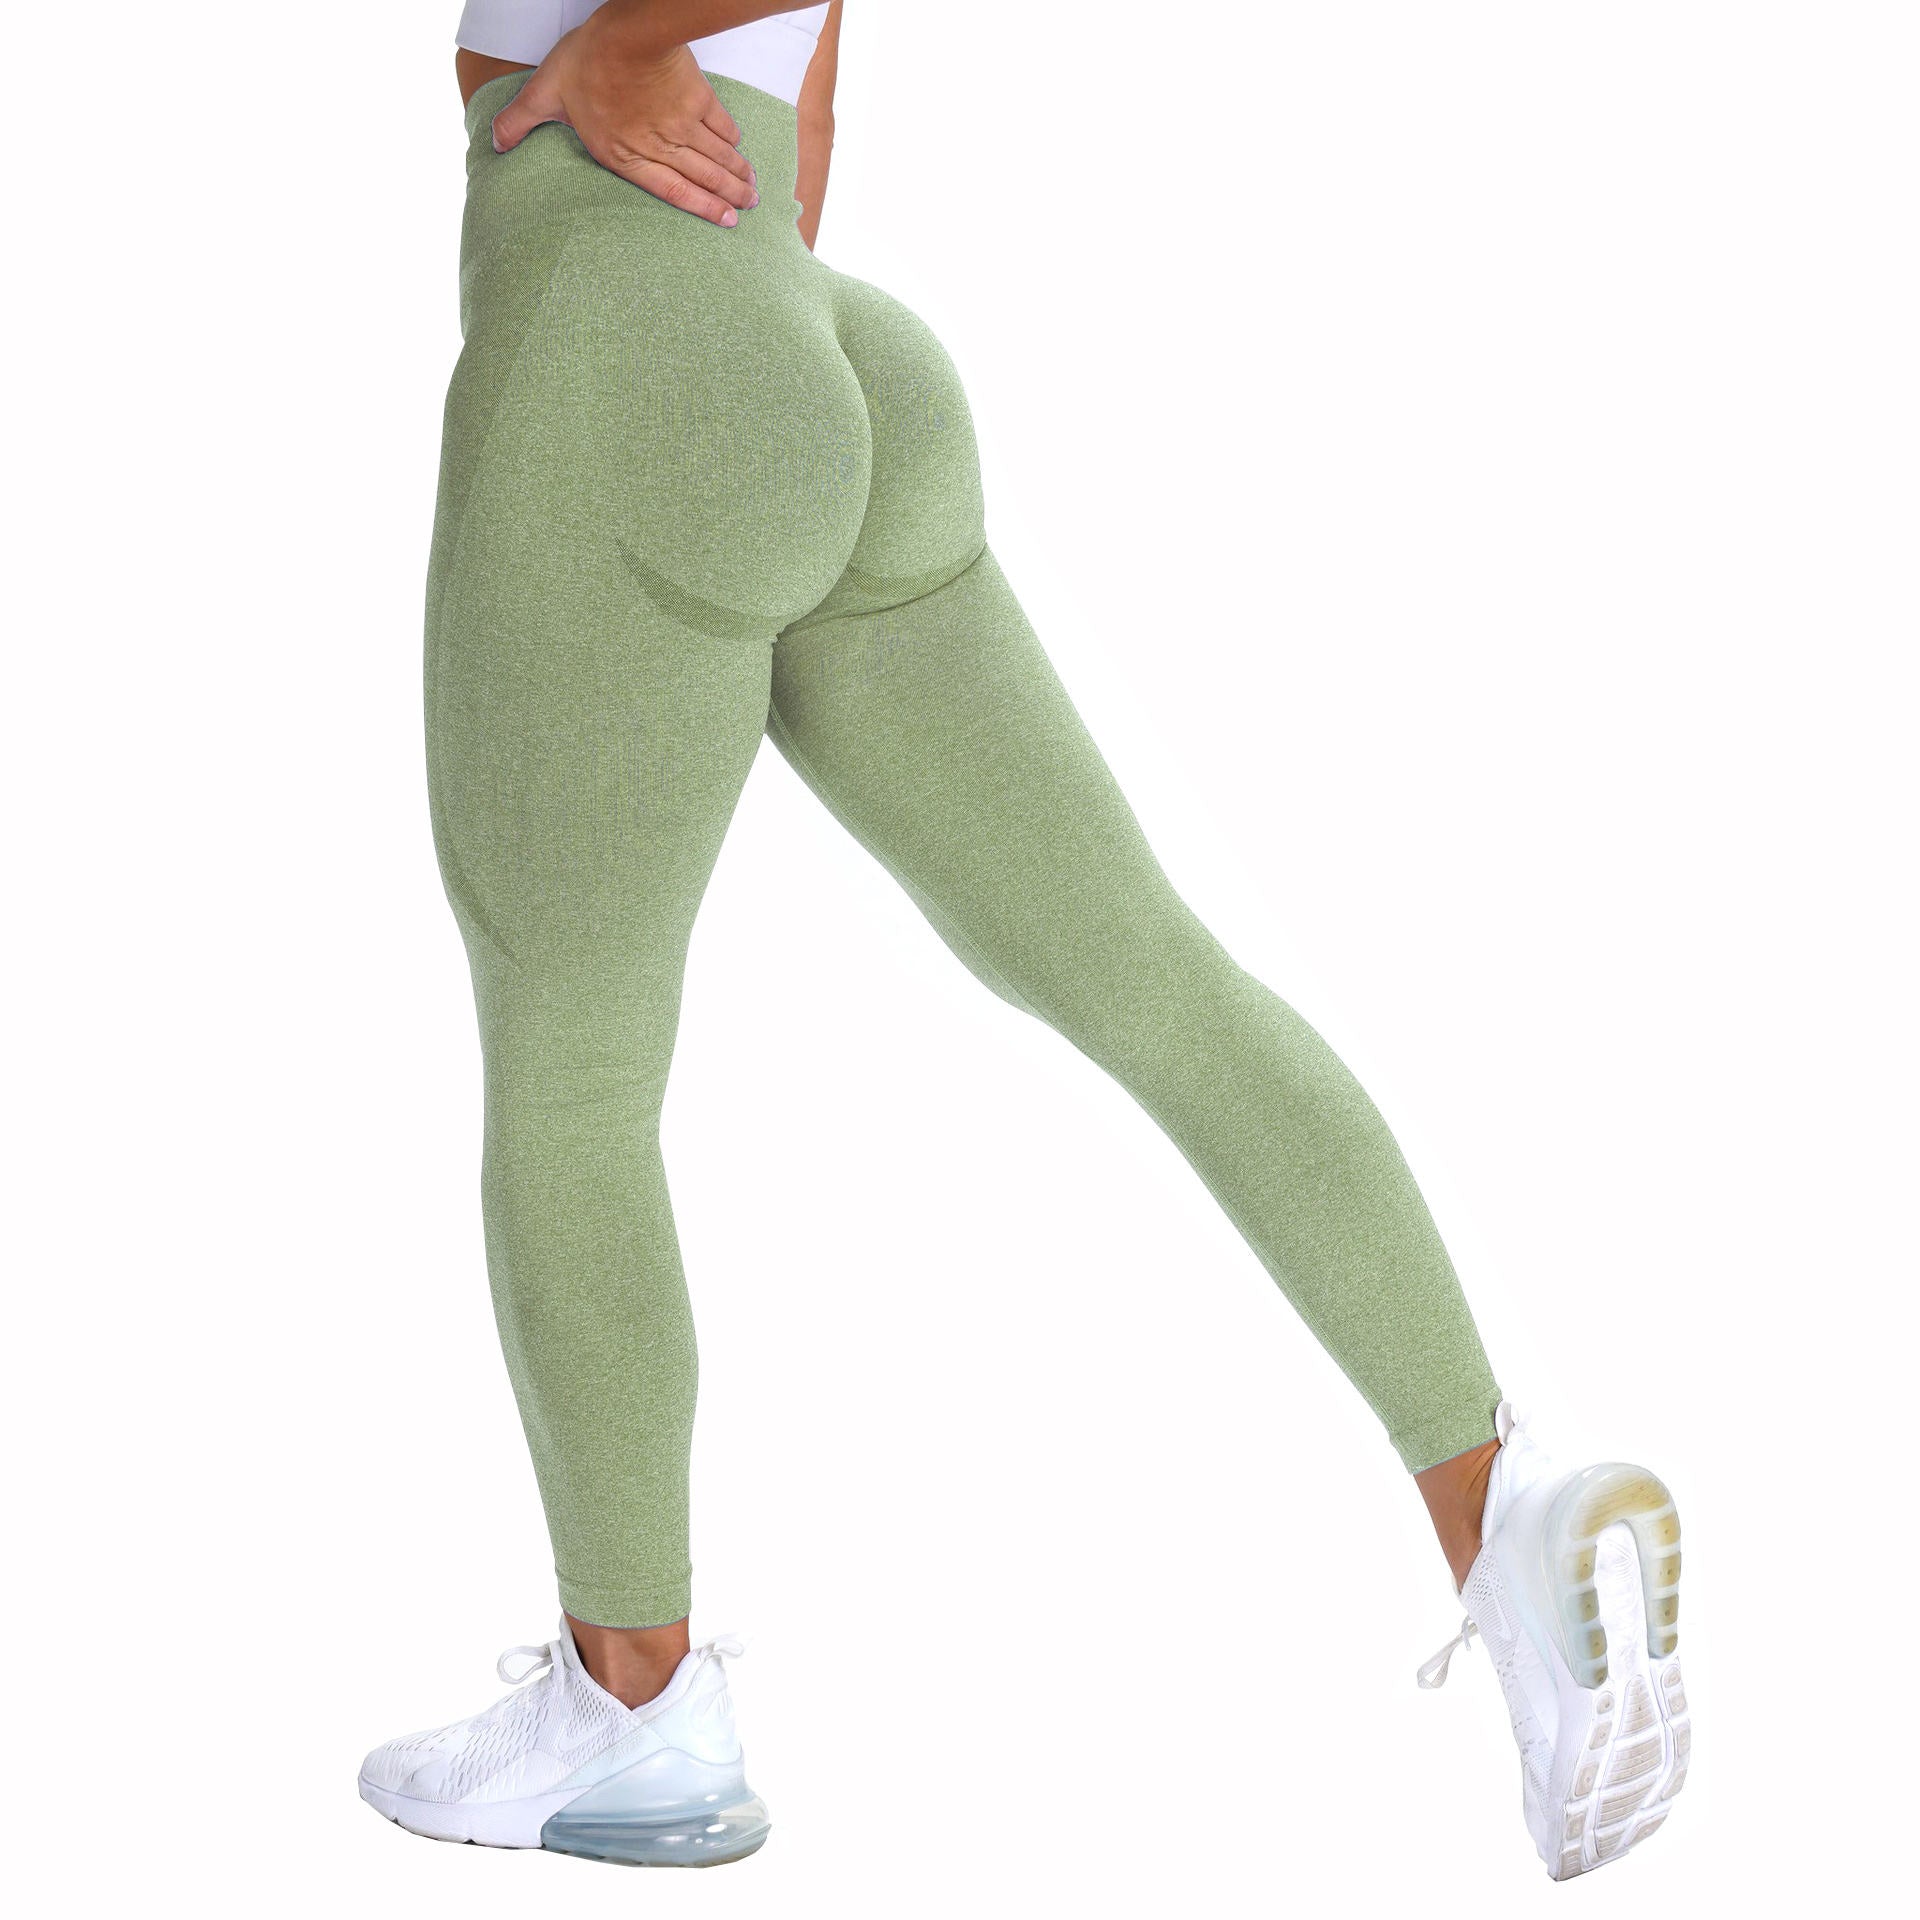 Hfyihgf High Waisted Leggings for Women Soft Comfy Tummy Control Slimming  Yoga Pants for Workout Running(Green,M)